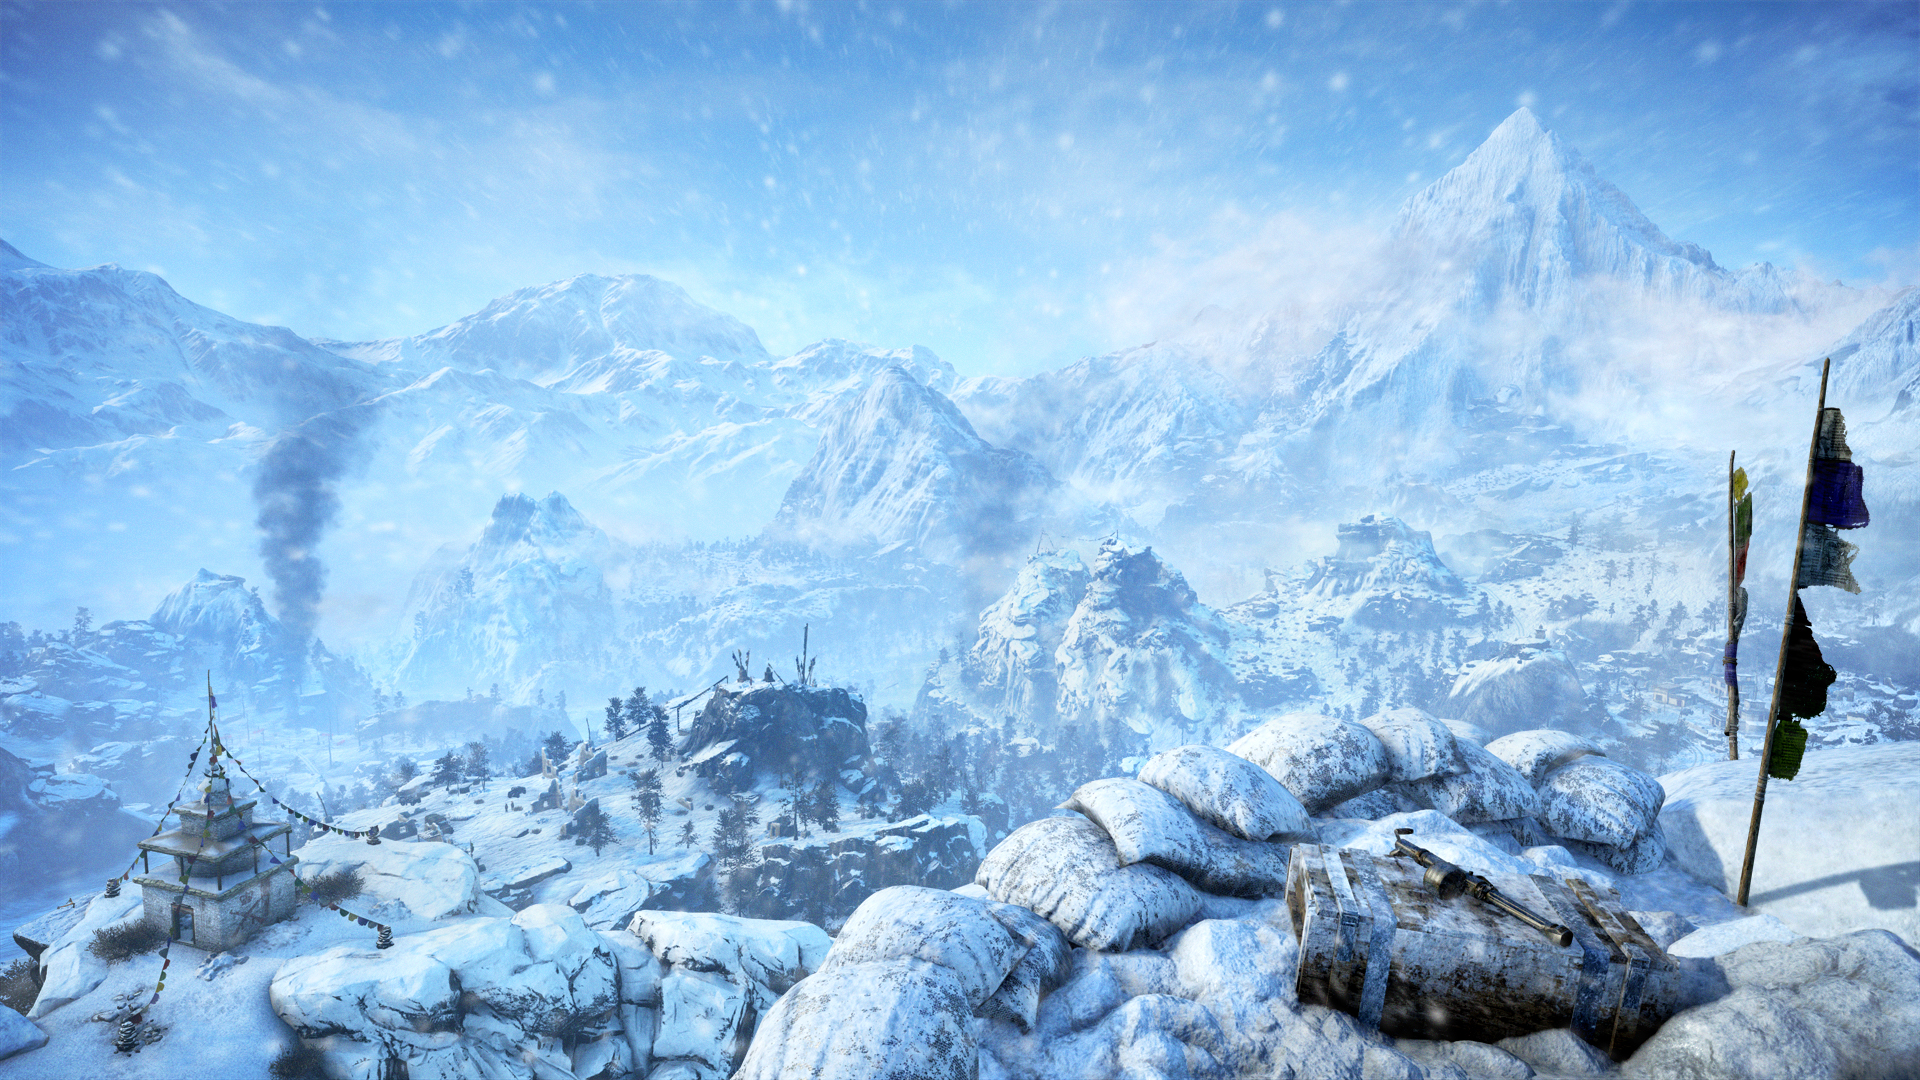 Media asset in full size related to 3dfxzone.it news item entitled as follows: Trailer e screenshots del DLC Valley of the Yetis di Far Cry 4 | Image Name: news22266_Far-Cry-4-Valley-of-the-Yetis-screenshot_10.jpg